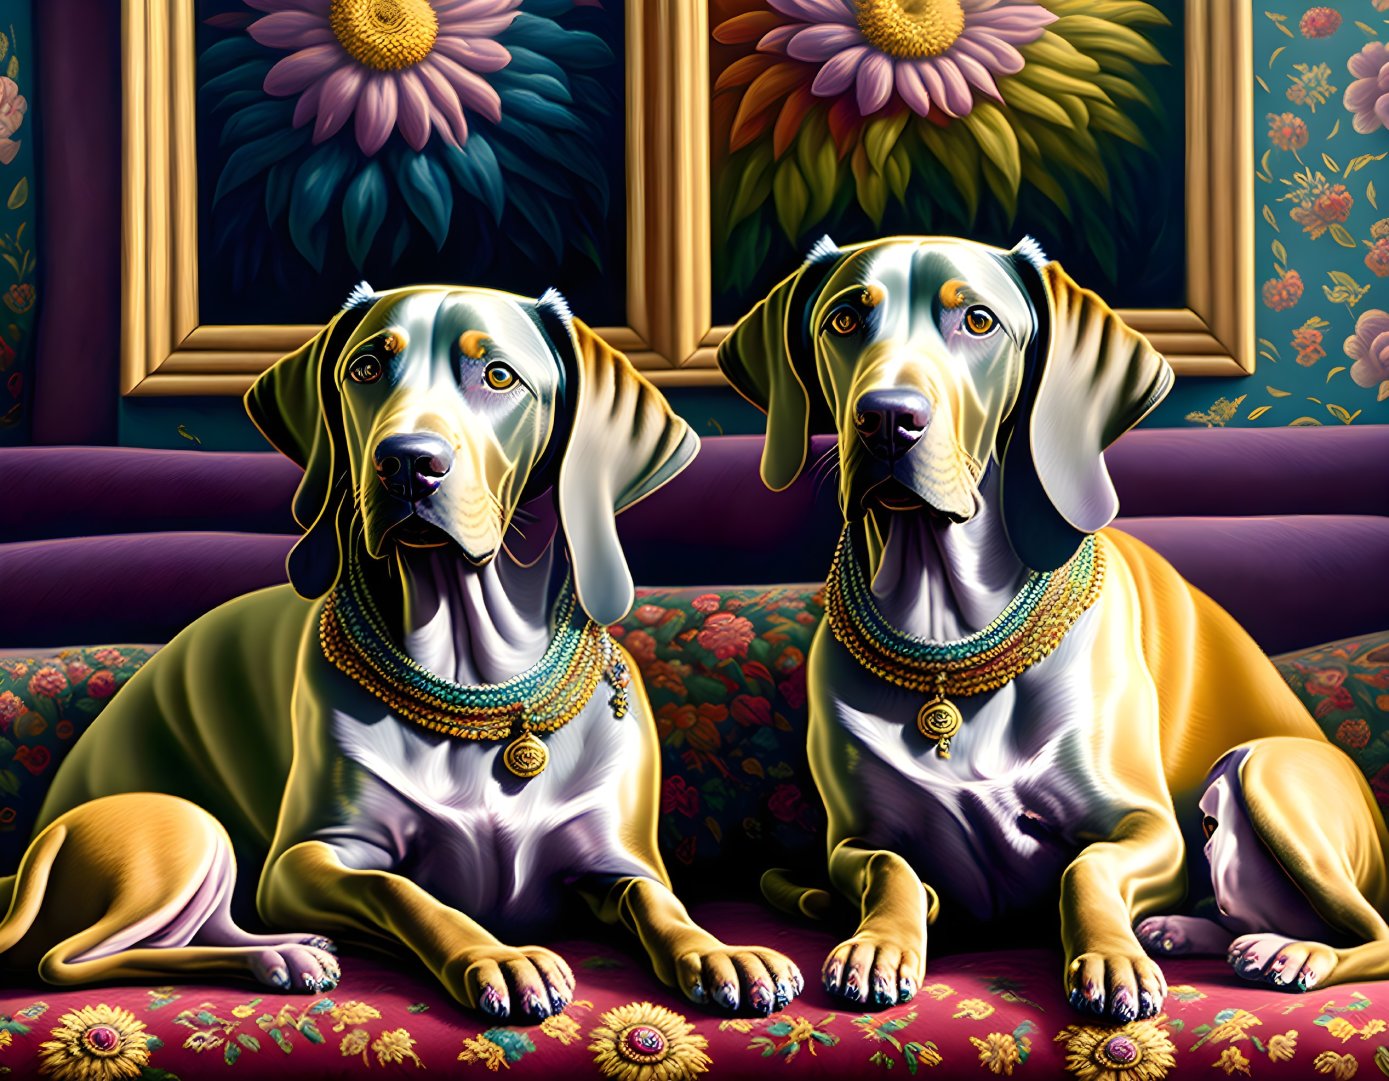 Regal dogs with necklaces in lush floral setting.